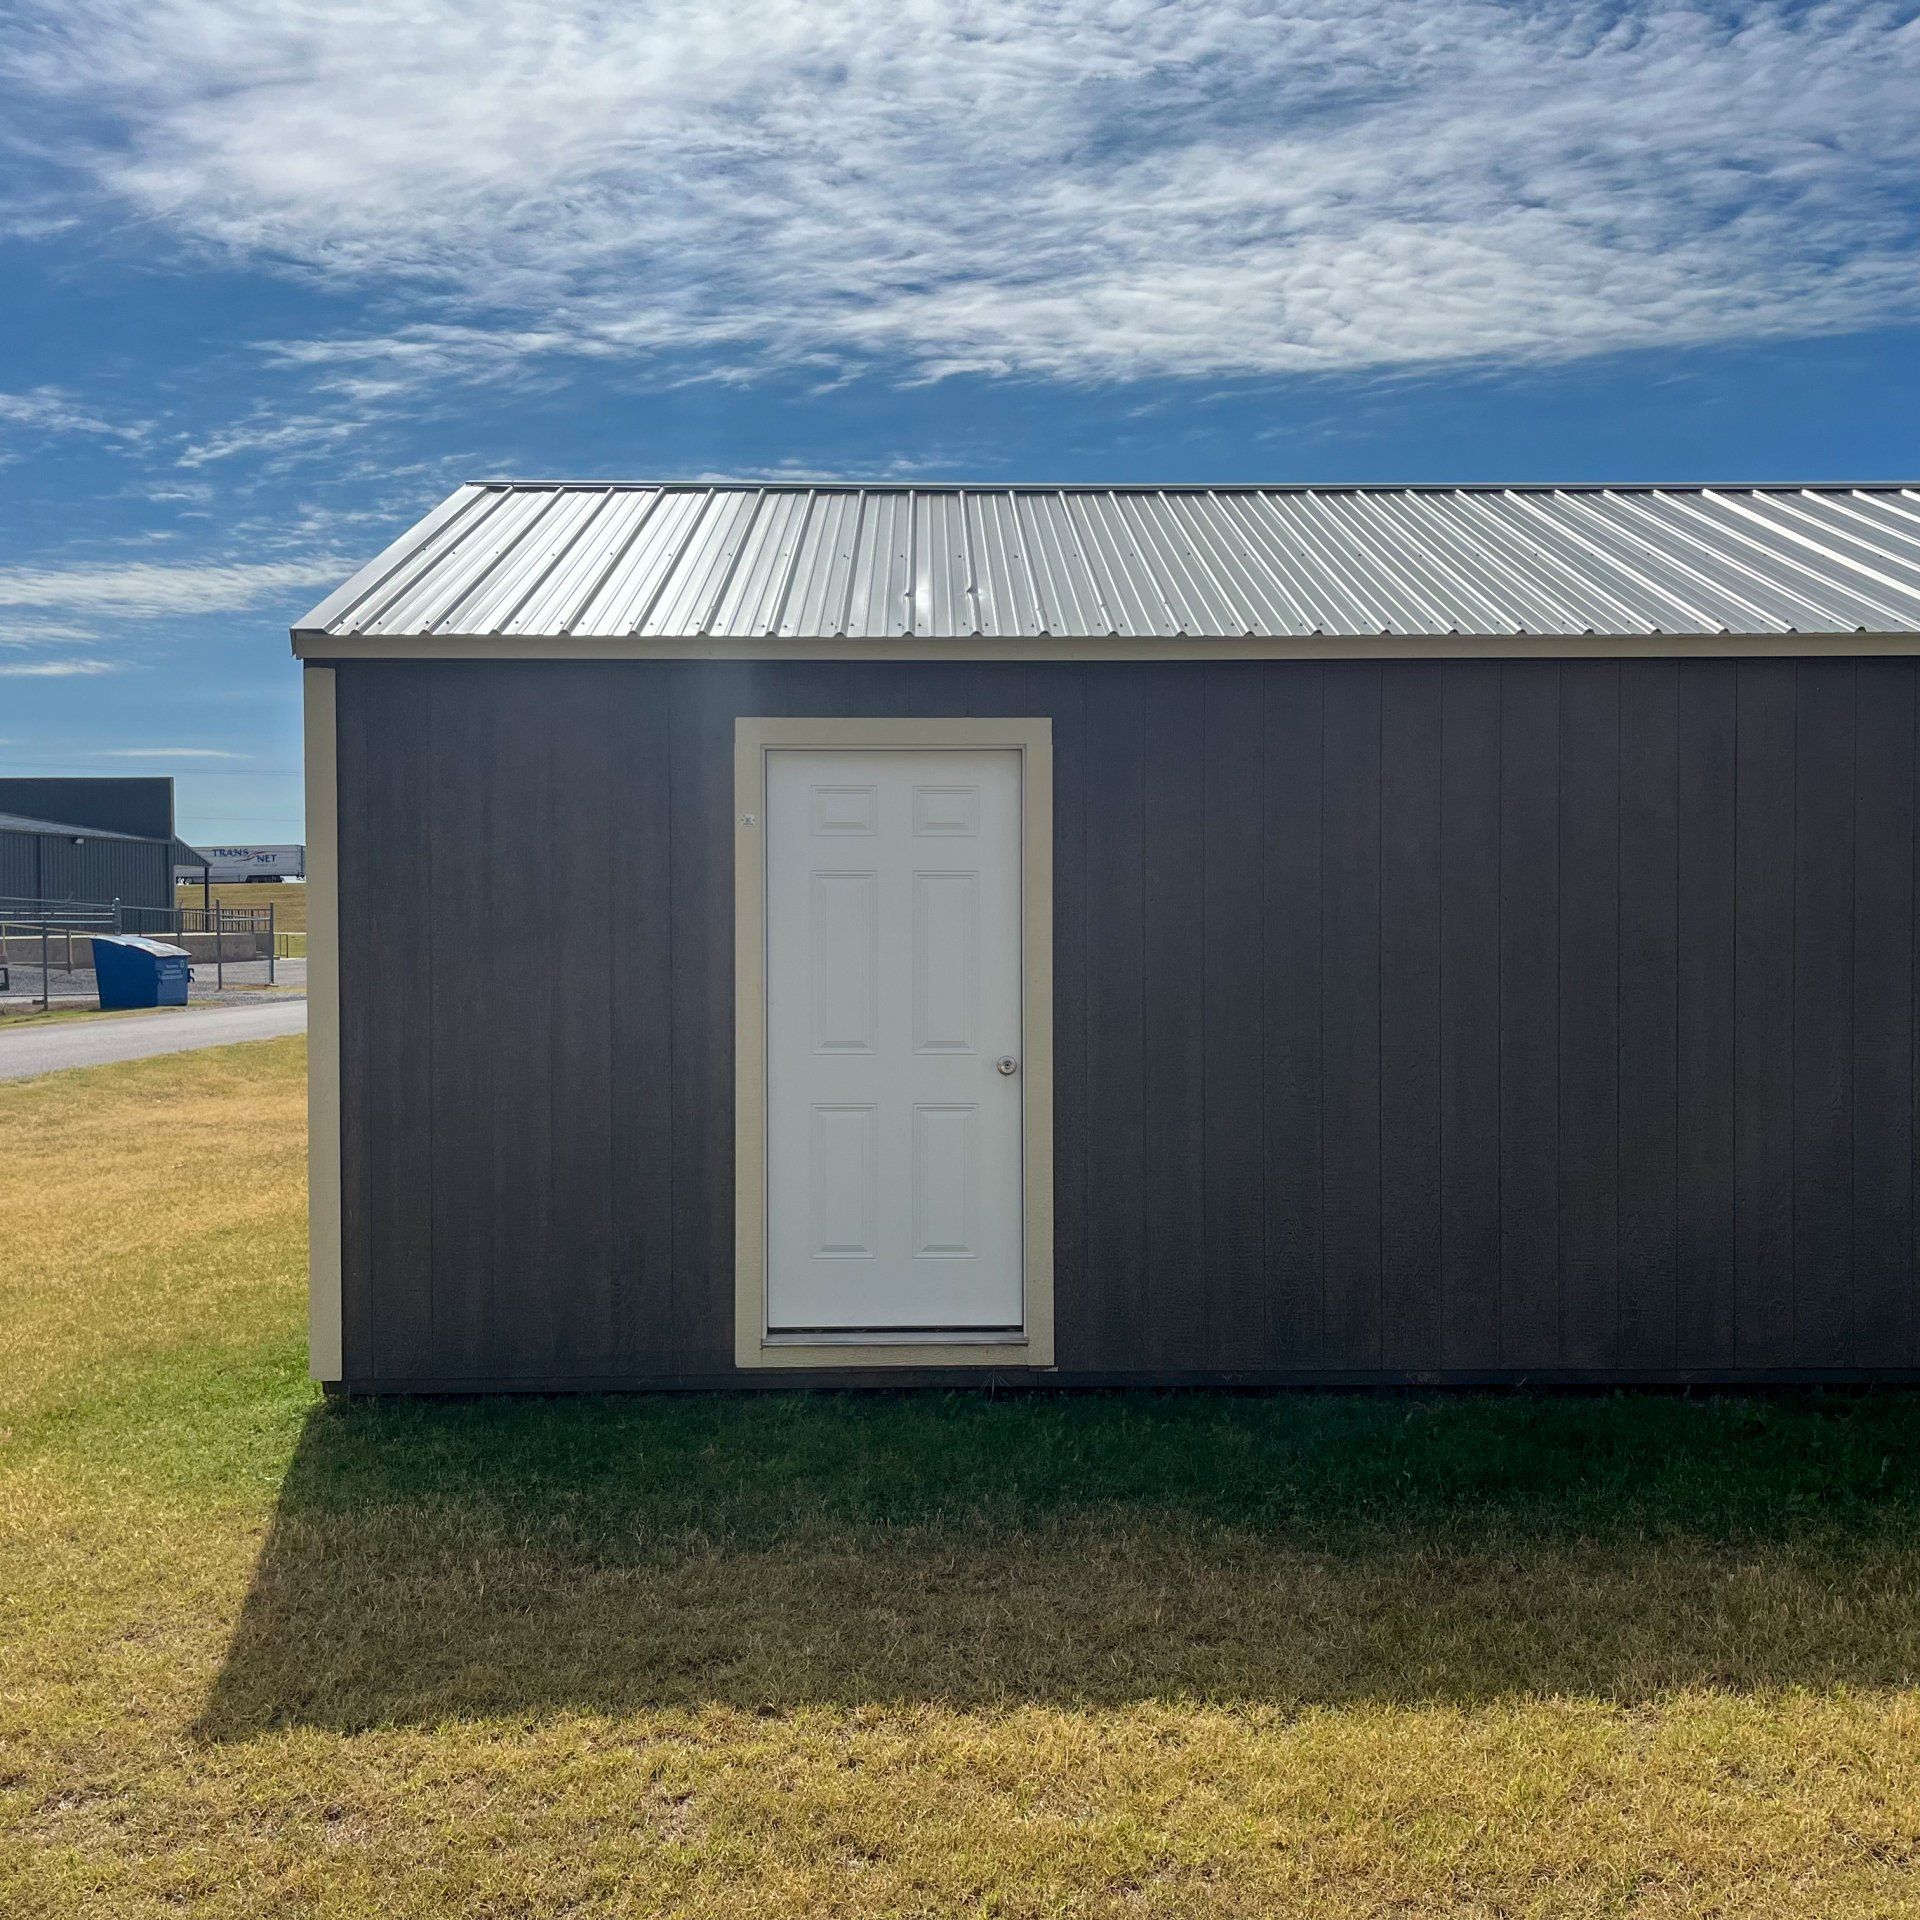 A small portable garage with a metal roof and a white door